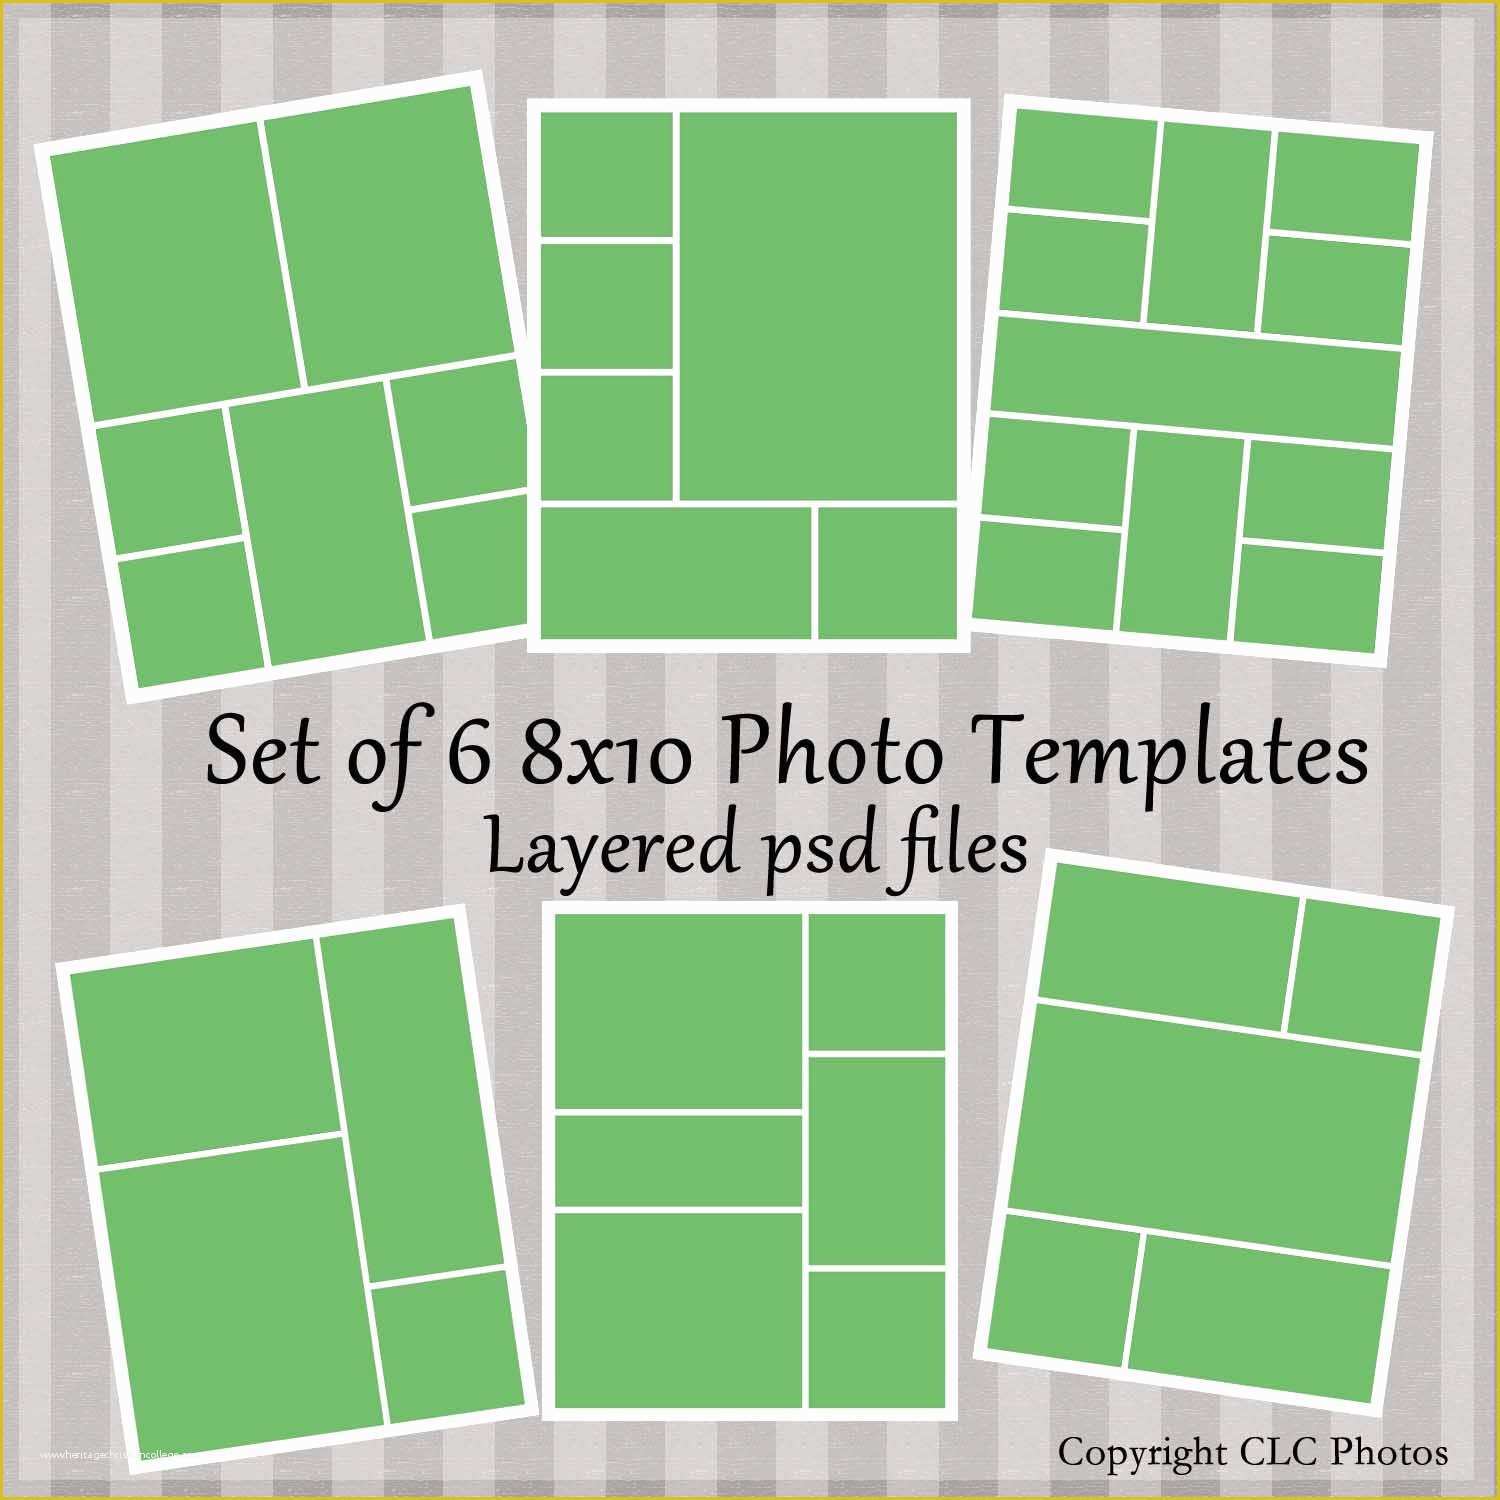 Photo Collage Templates Free Download Of 8x10 Template Collage Story Board Layered Psd Files Set